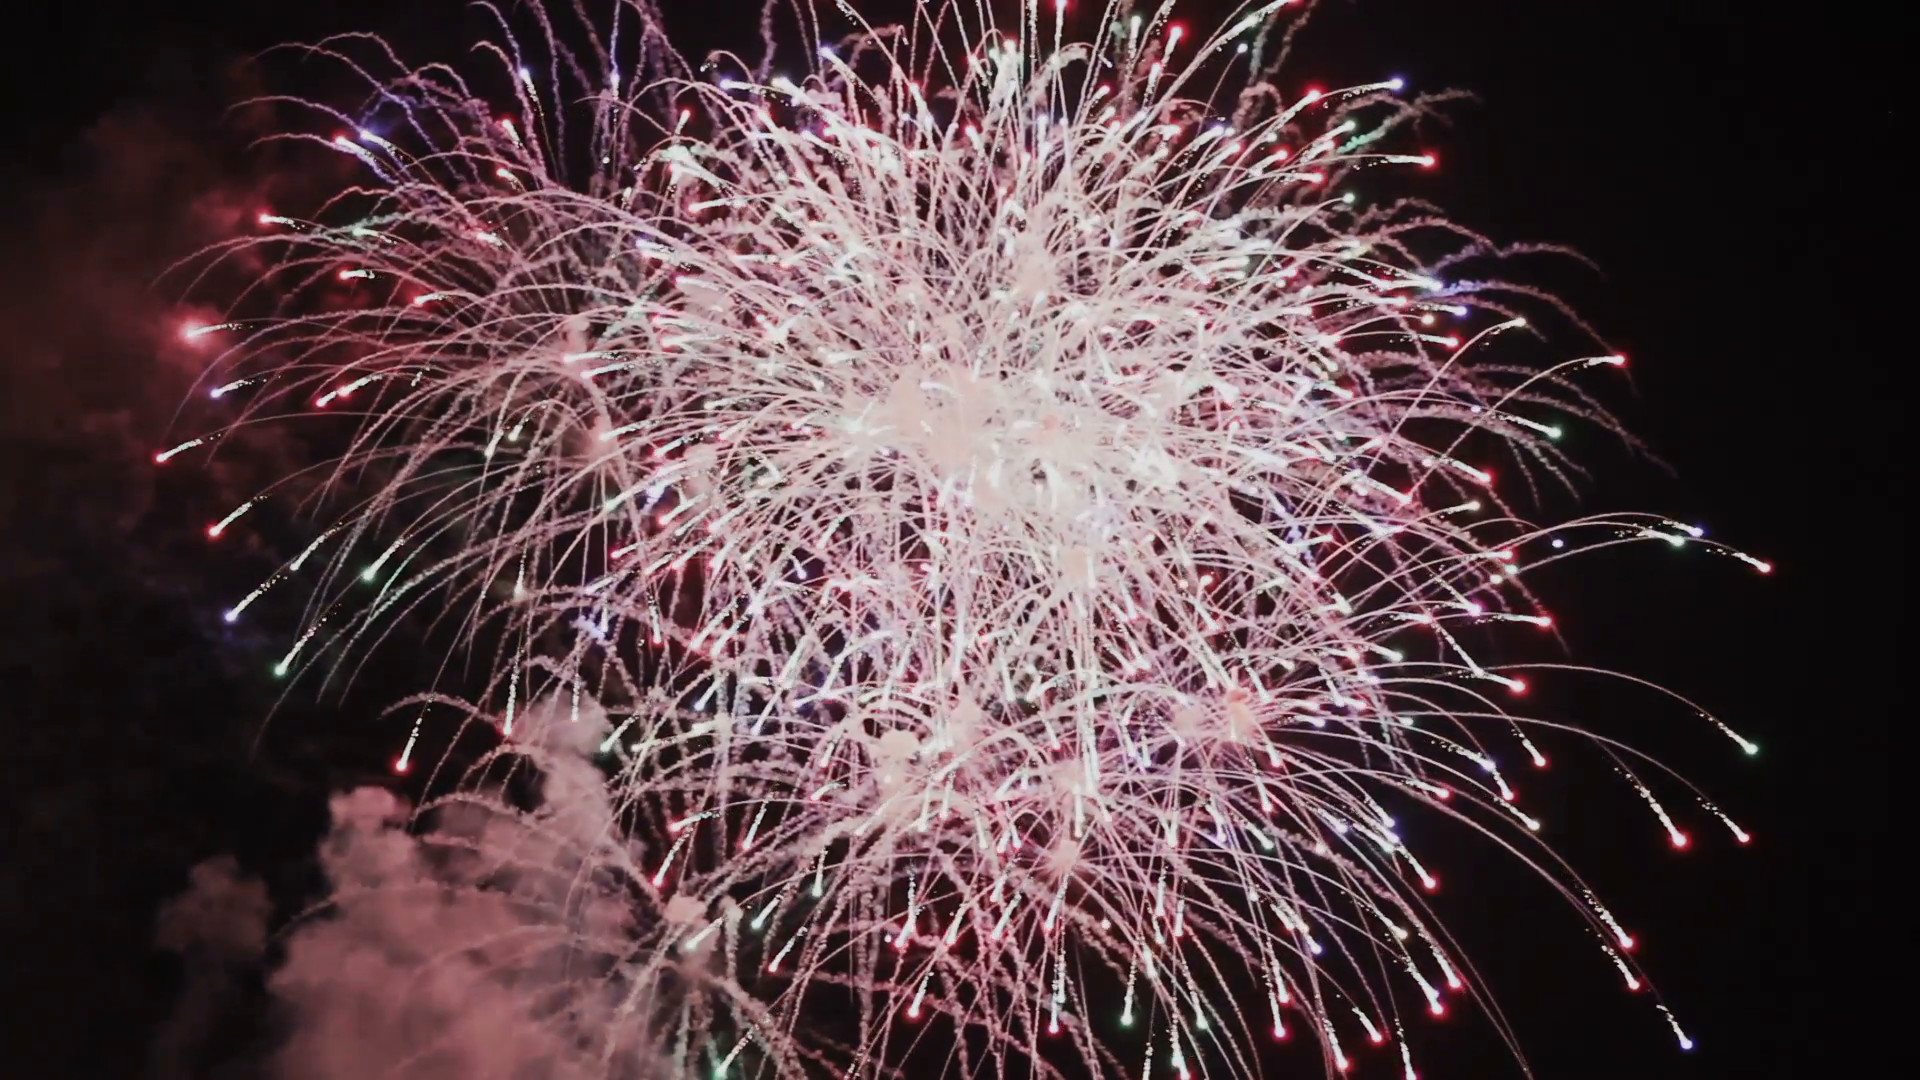 1920x1080 Blurry Celebration and Fireworks Explosions Background Stock Video Footage  - VideoBlocks